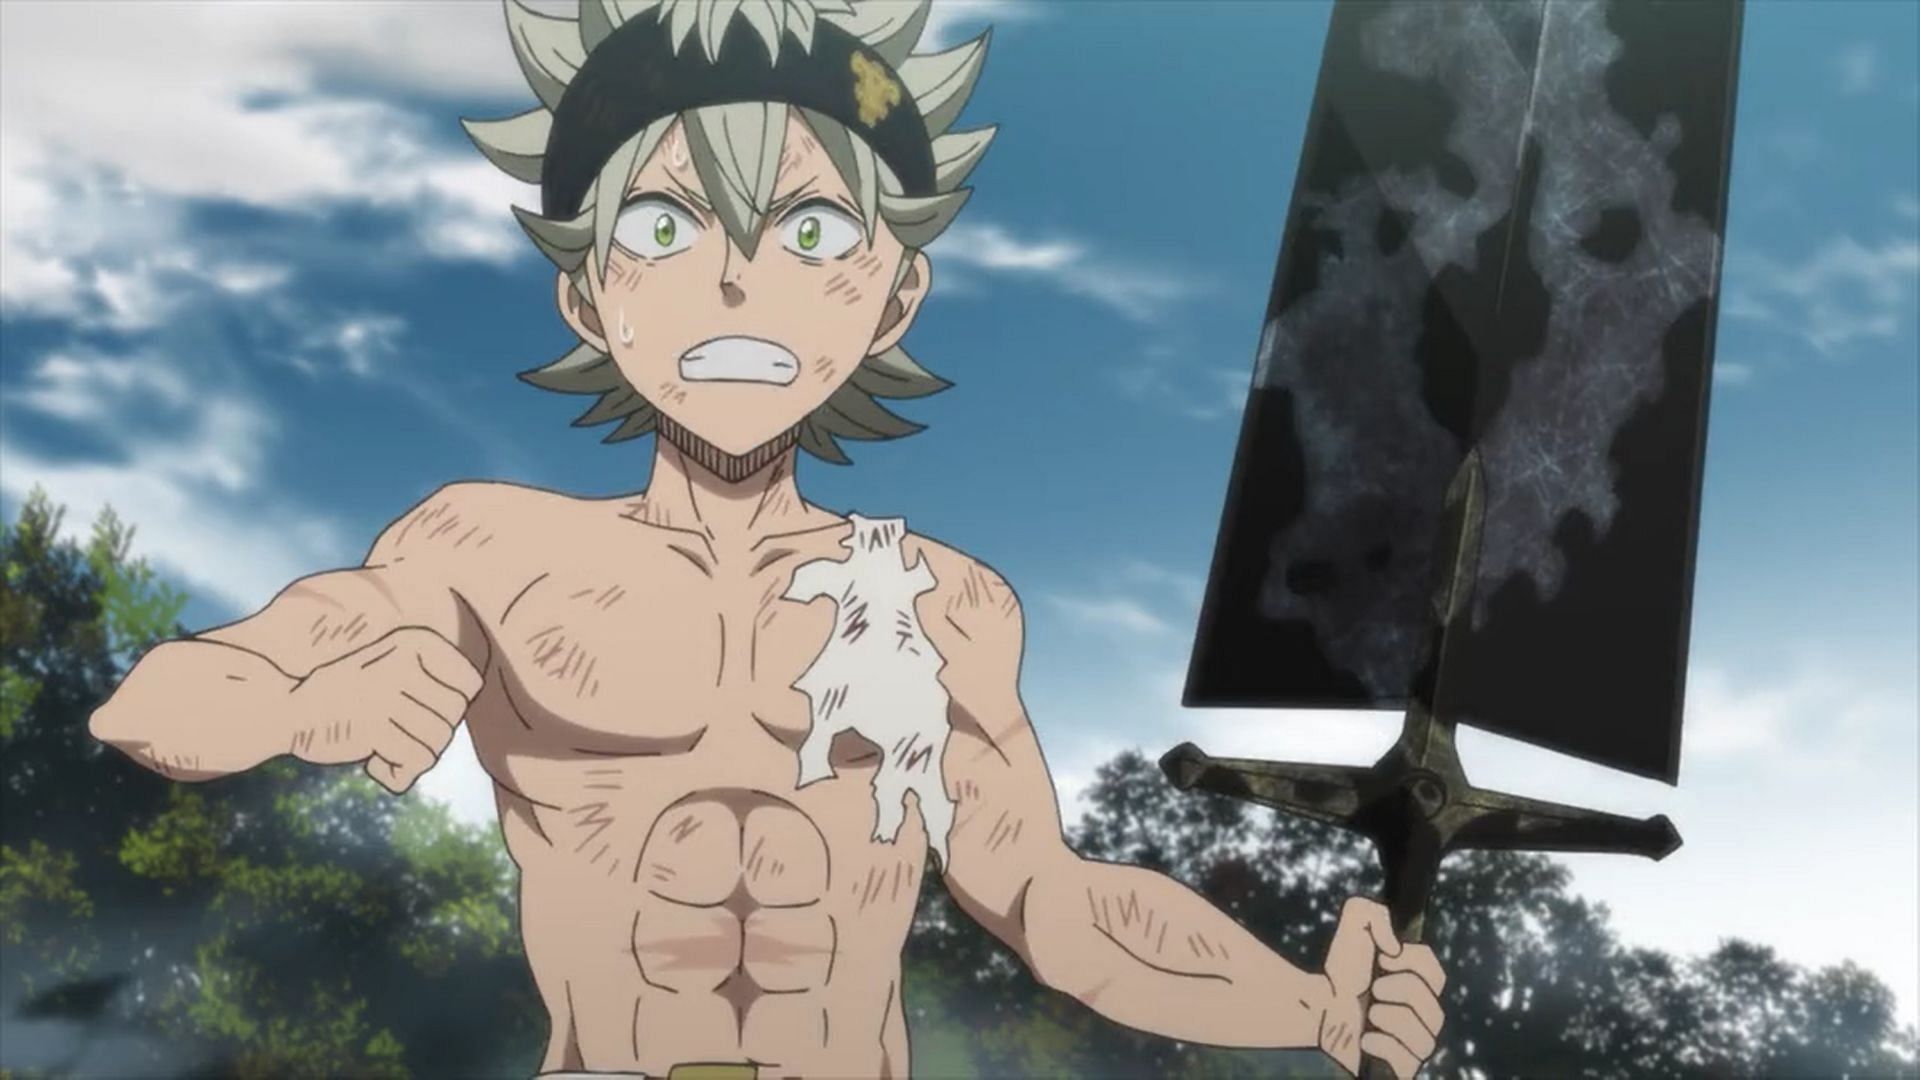 Asta is all set to receive his next powerup during his time spent in Black Clover